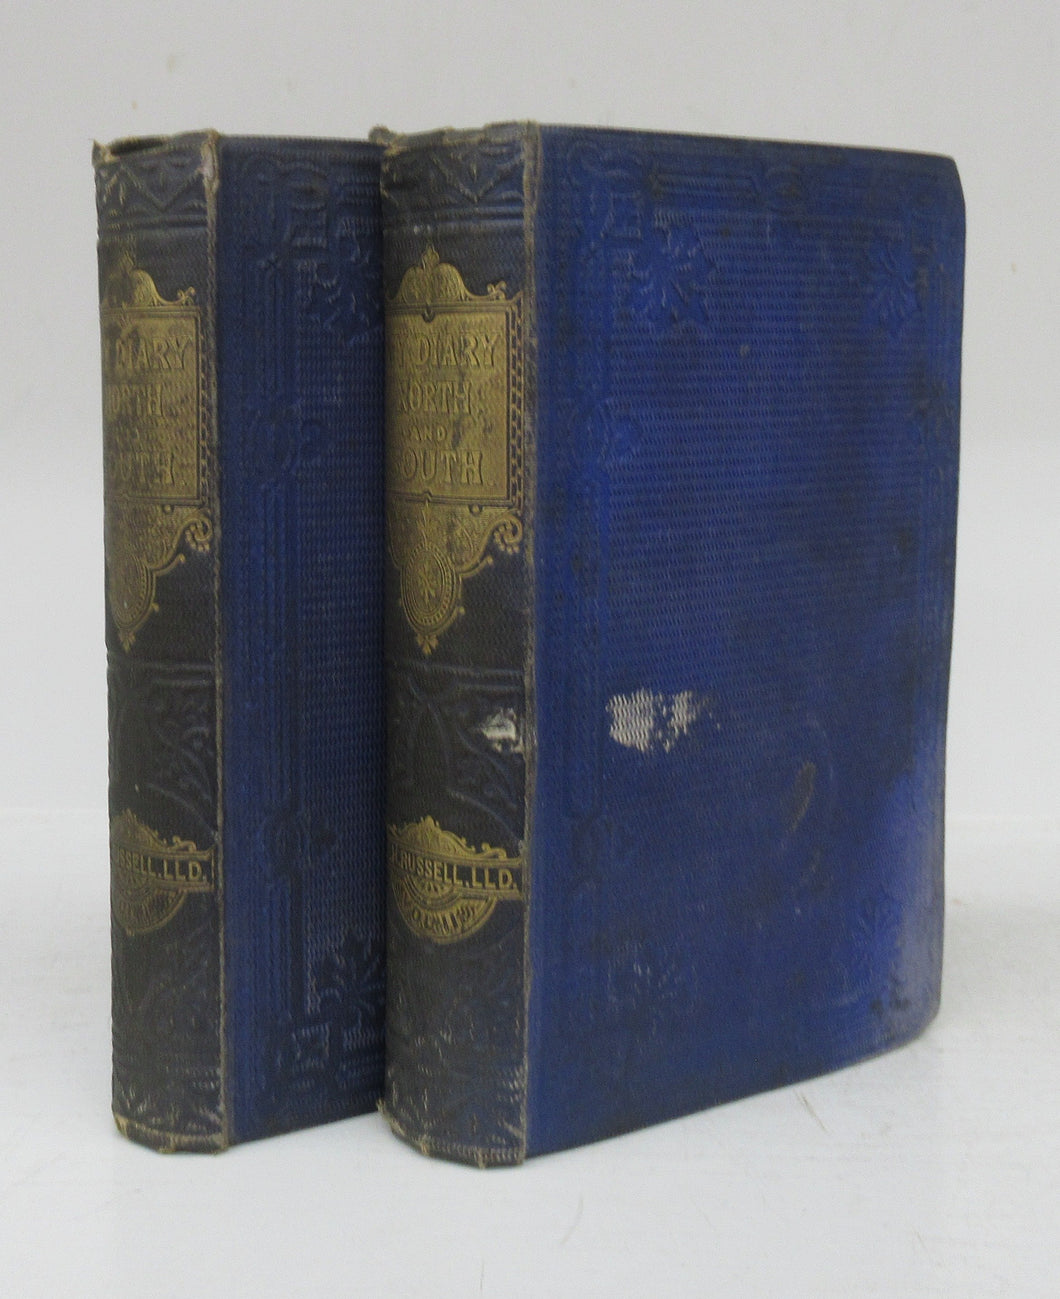 My Diary: North and South. In Two Volumes